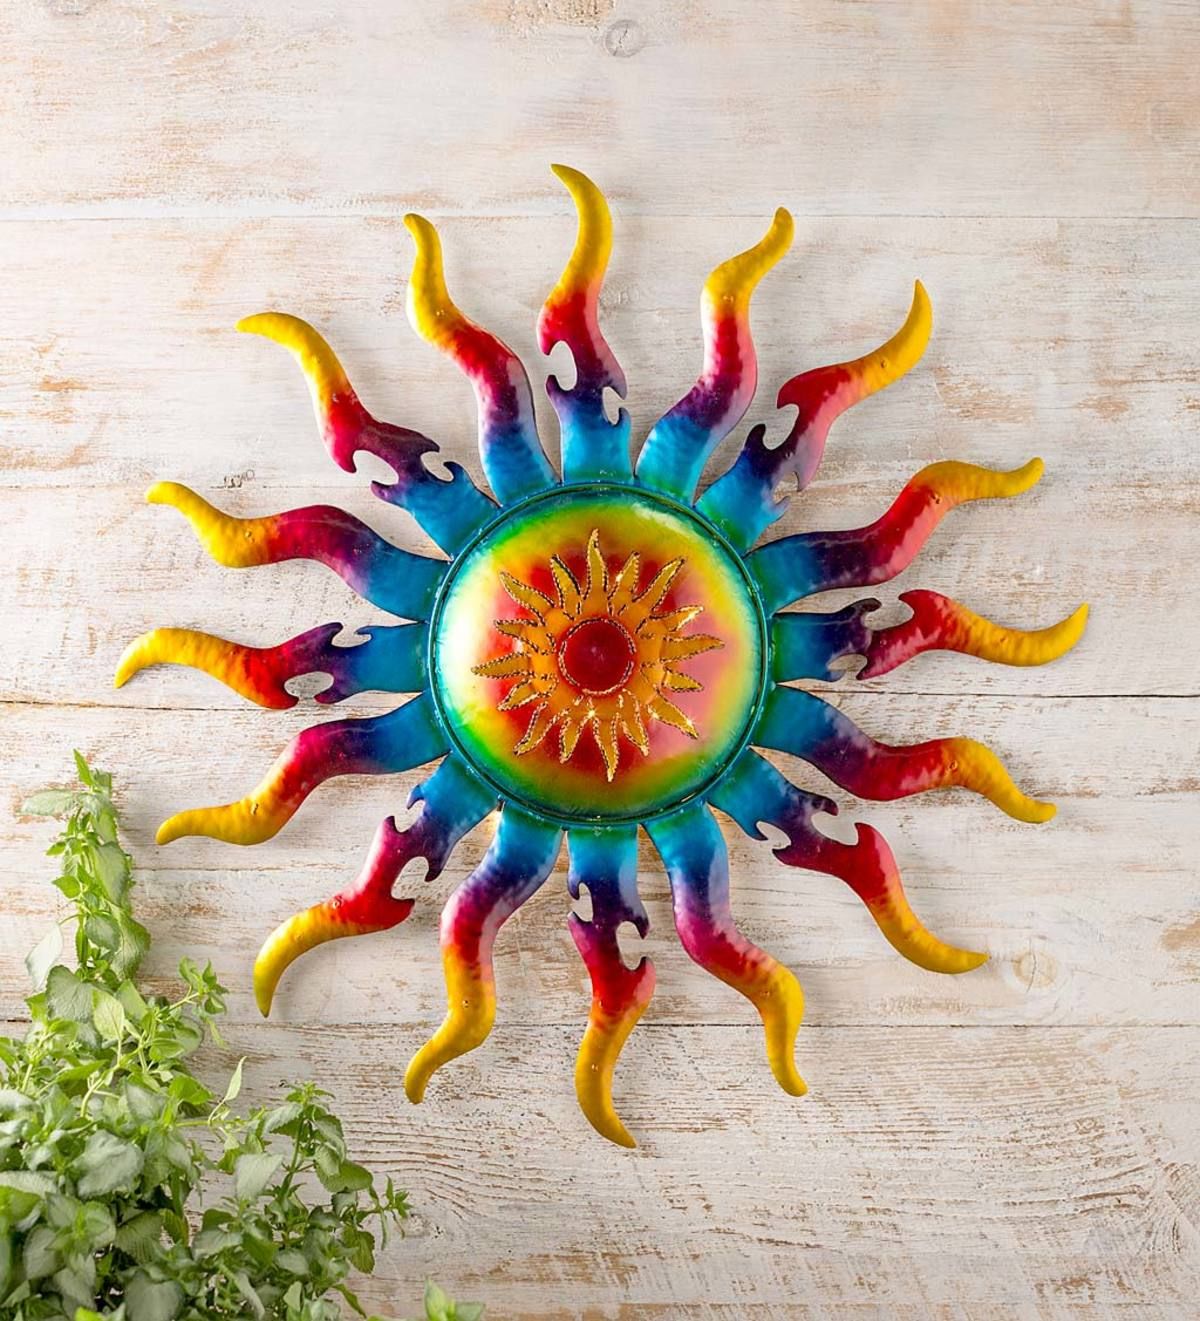 Handcrafted Lighted Metal Sun Wall Art | Wind And Weather Intended For The Sun Wall Art (View 5 of 15)